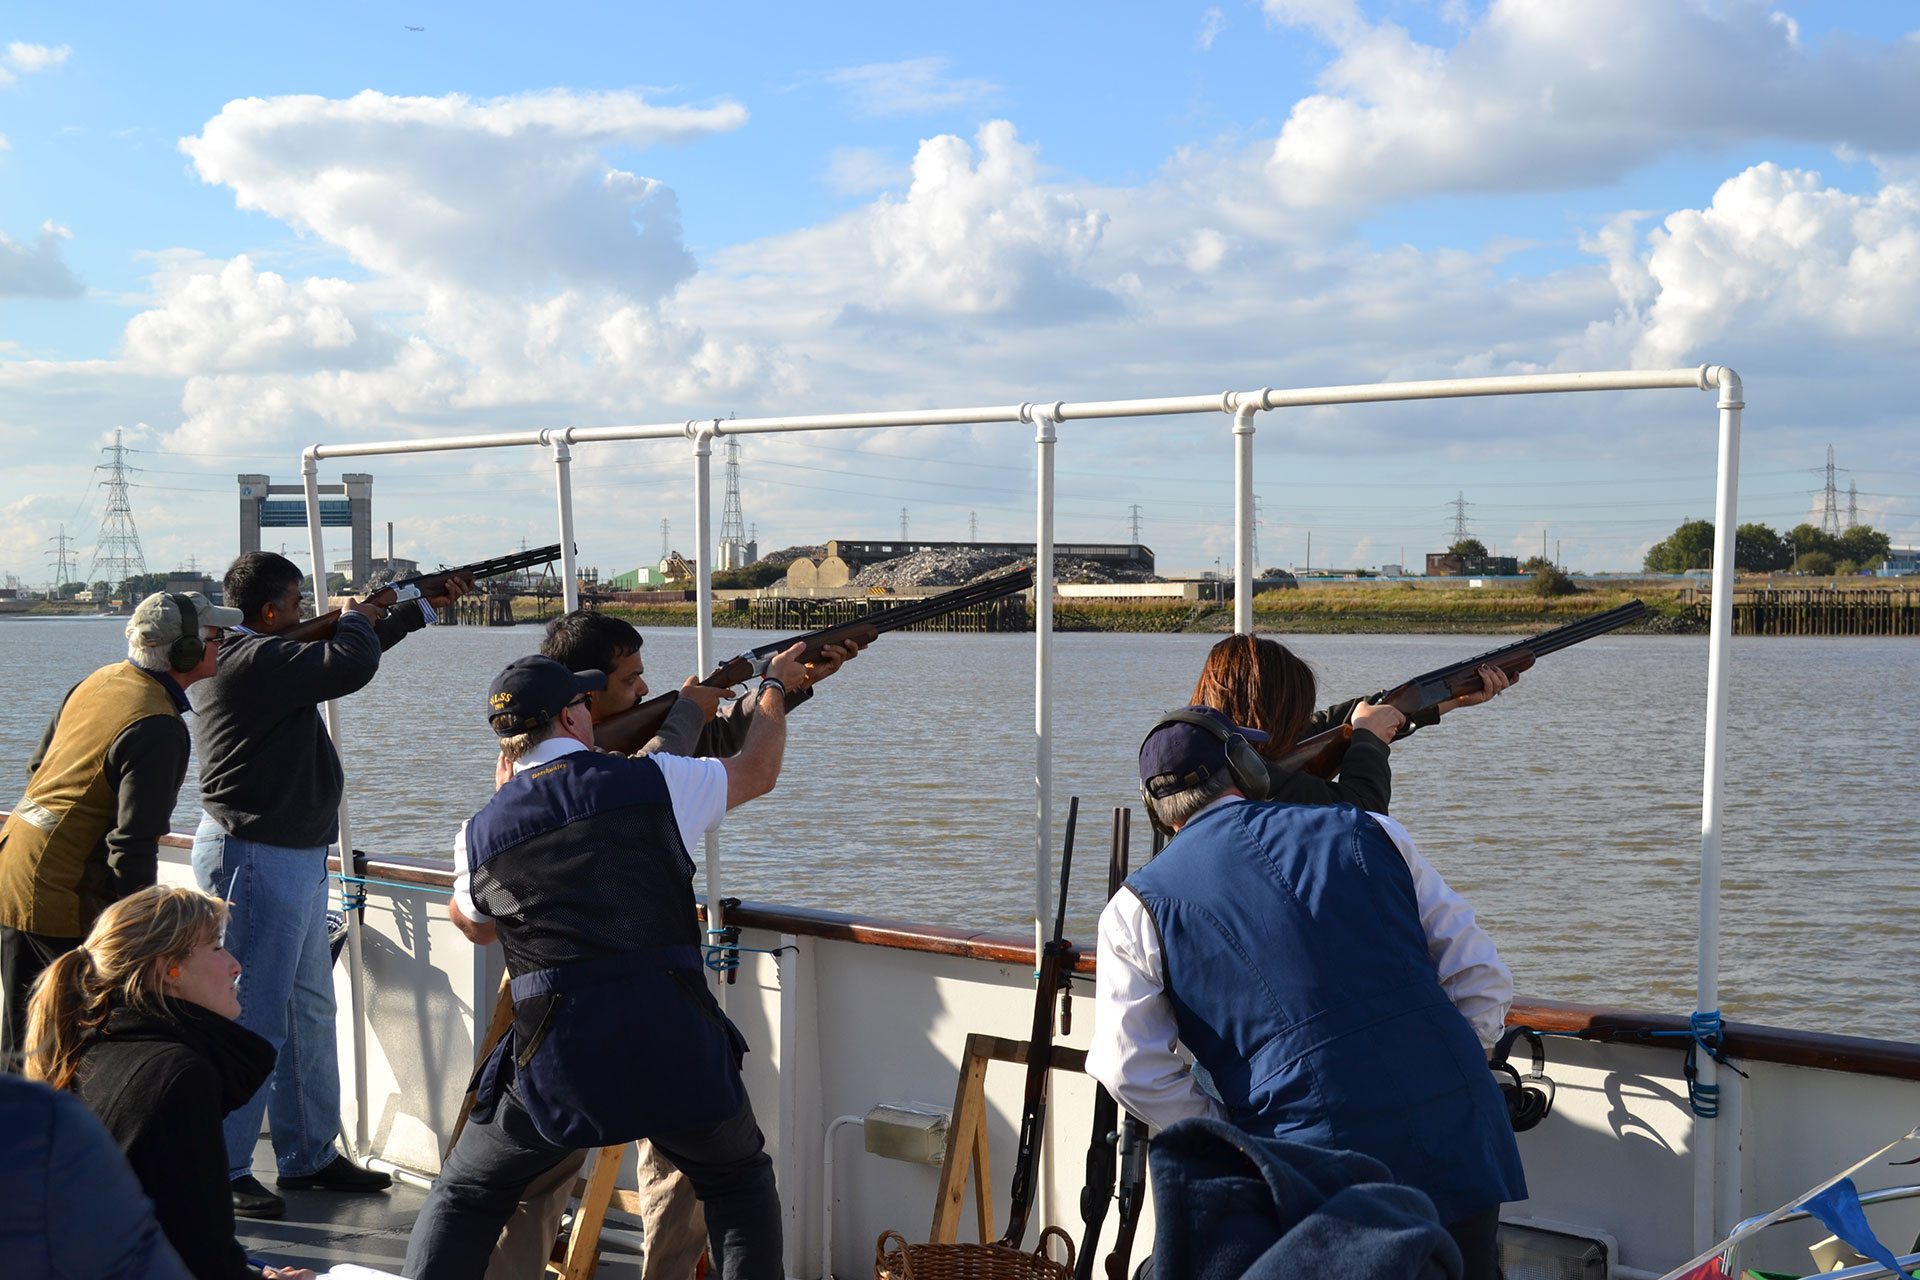 Clay Pigeon Shooting on the Thames